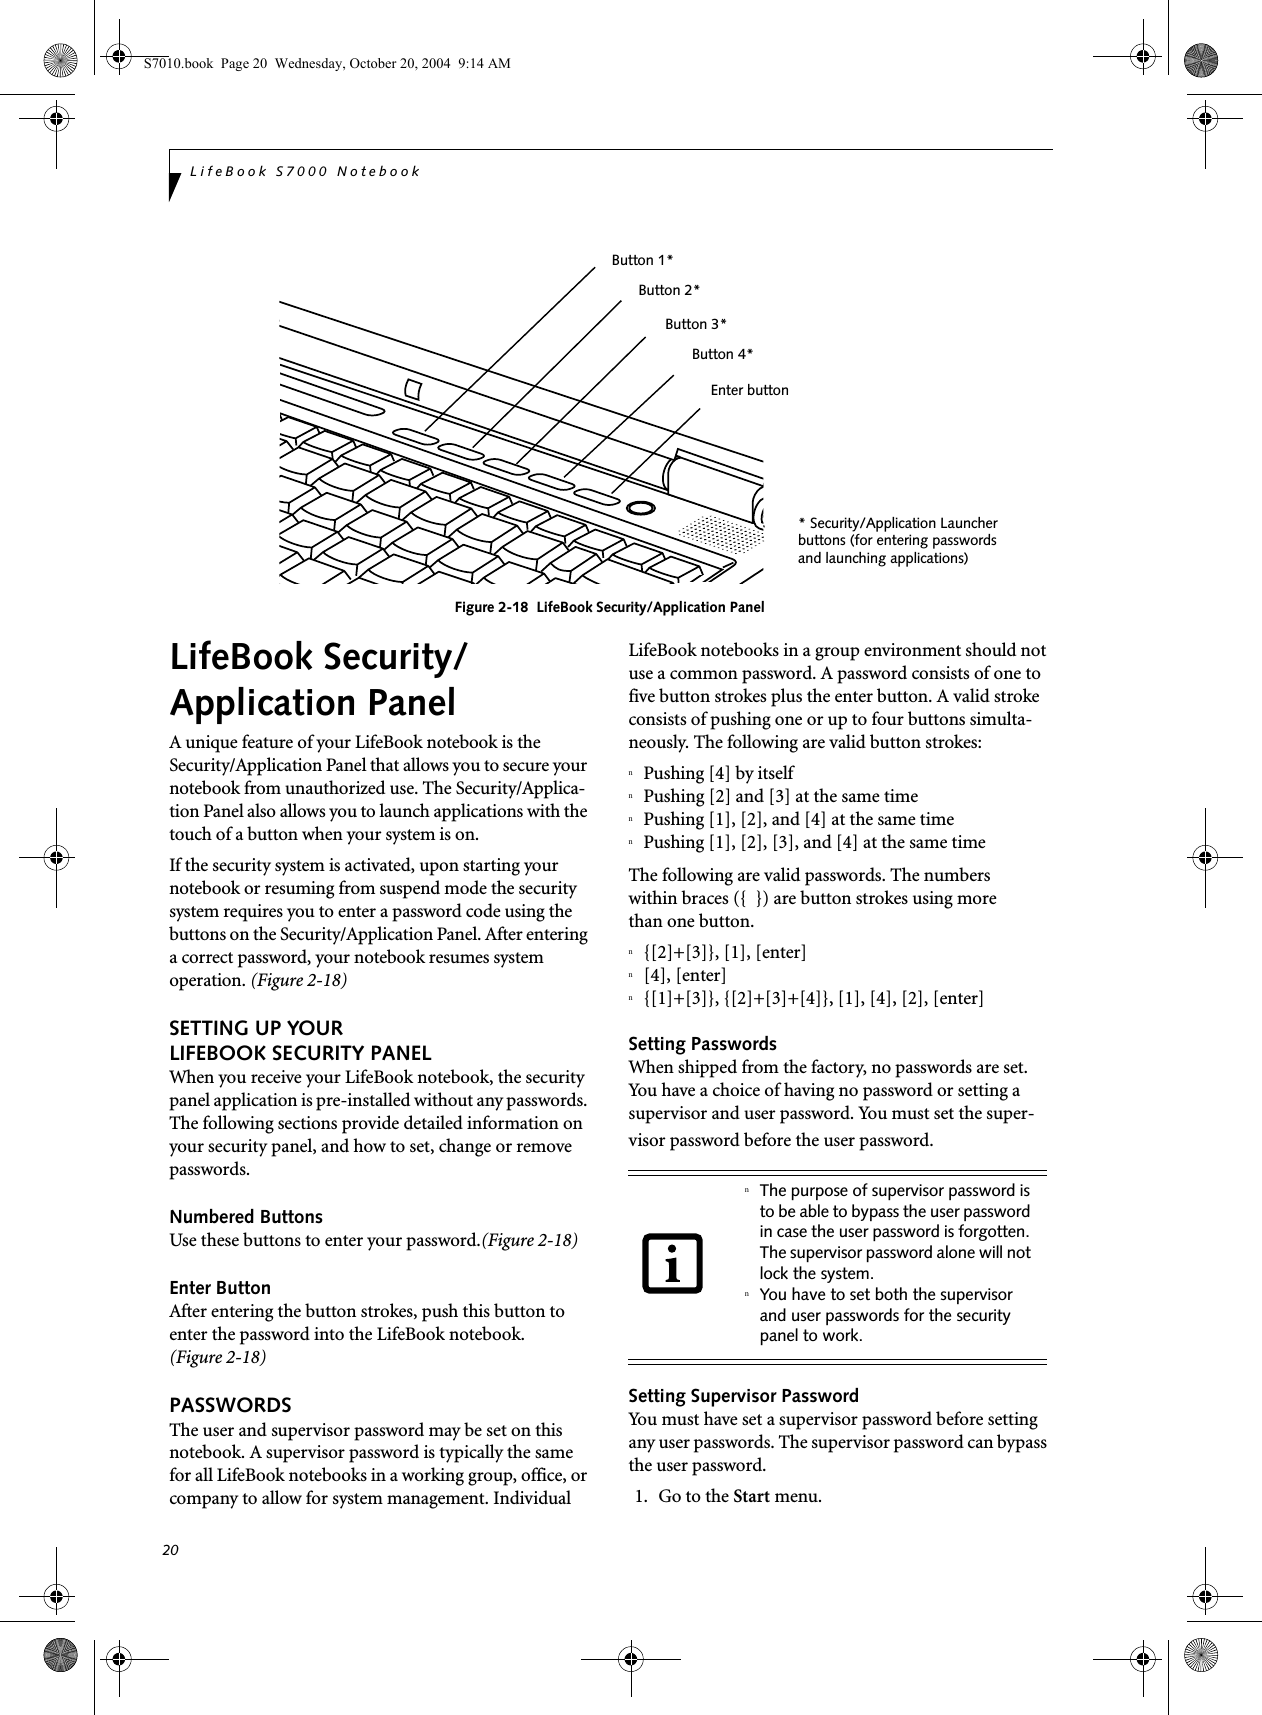 20LifeBook S7000 NotebookFigure 2-18  LifeBook Security/Application Panel LifeBook Security/Application PanelA unique feature of your LifeBook notebook is the Security/Application Panel that allows you to secure your notebook from unauthorized use. The Security/Applica-tion Panel also allows you to launch applications with the touch of a button when your system is on.If the security system is activated, upon starting your notebook or resuming from suspend mode the security system requires you to enter a password code using the buttons on the Security/Application Panel. After entering a correct password, your notebook resumes system operation. (Figure 2-18)SETTING UP YOUR LIFEBOOK SECURITY PANELWhen you receive your LifeBook notebook, the security panel application is pre-installed without any passwords. The following sections provide detailed information on your security panel, and how to set, change or remove passwords.Numbered ButtonsUse these buttons to enter your password.(Figure 2-18)Enter ButtonAfter entering the button strokes, push this button to enter the password into the LifeBook notebook. (Figure 2-18)PASSWORDSThe user and supervisor password may be set on this notebook. A supervisor password is typically the same for all LifeBook notebooks in a working group, office, or company to allow for system management. Individual LifeBook notebooks in a group environment should not use a common password. A password consists of one to five button strokes plus the enter button. A valid stroke consists of pushing one or up to four buttons simulta-neously. The following are valid button strokes: nPushing [4] by itselfnPushing [2] and [3] at the same timenPushing [1], [2], and [4] at the same timenPushing [1], [2], [3], and [4] at the same timeThe following are valid passwords. The numberswithin braces ({  }) are button strokes using morethan one button. n{[2]+[3]}, [1], [enter]n[4], [enter]n{[1]+[3]}, {[2]+[3]+[4]}, [1], [4], [2], [enter]Setting PasswordsWhen shipped from the factory, no passwords are set. You have a choice of having no password or setting a supervisor and user password. You must set the super-visor password before the user password. Setting Supervisor PasswordYou must have set a supervisor password before setting any user passwords. The supervisor password can bypass the user password.1. Go to the Start menu.* Security/Application Launcherbuttons (for entering passwordsand launching applications)Enter buttonButton 1*Button 2*Button 3*Button 4*nThe purpose of supervisor password is to be able to bypass the user password in case the user password is forgotten. The supervisor password alone will not lock the system.nYou have to set both the supervisor and user passwords for the security panel to work.S7010.book  Page 20  Wednesday, October 20, 2004  9:14 AM